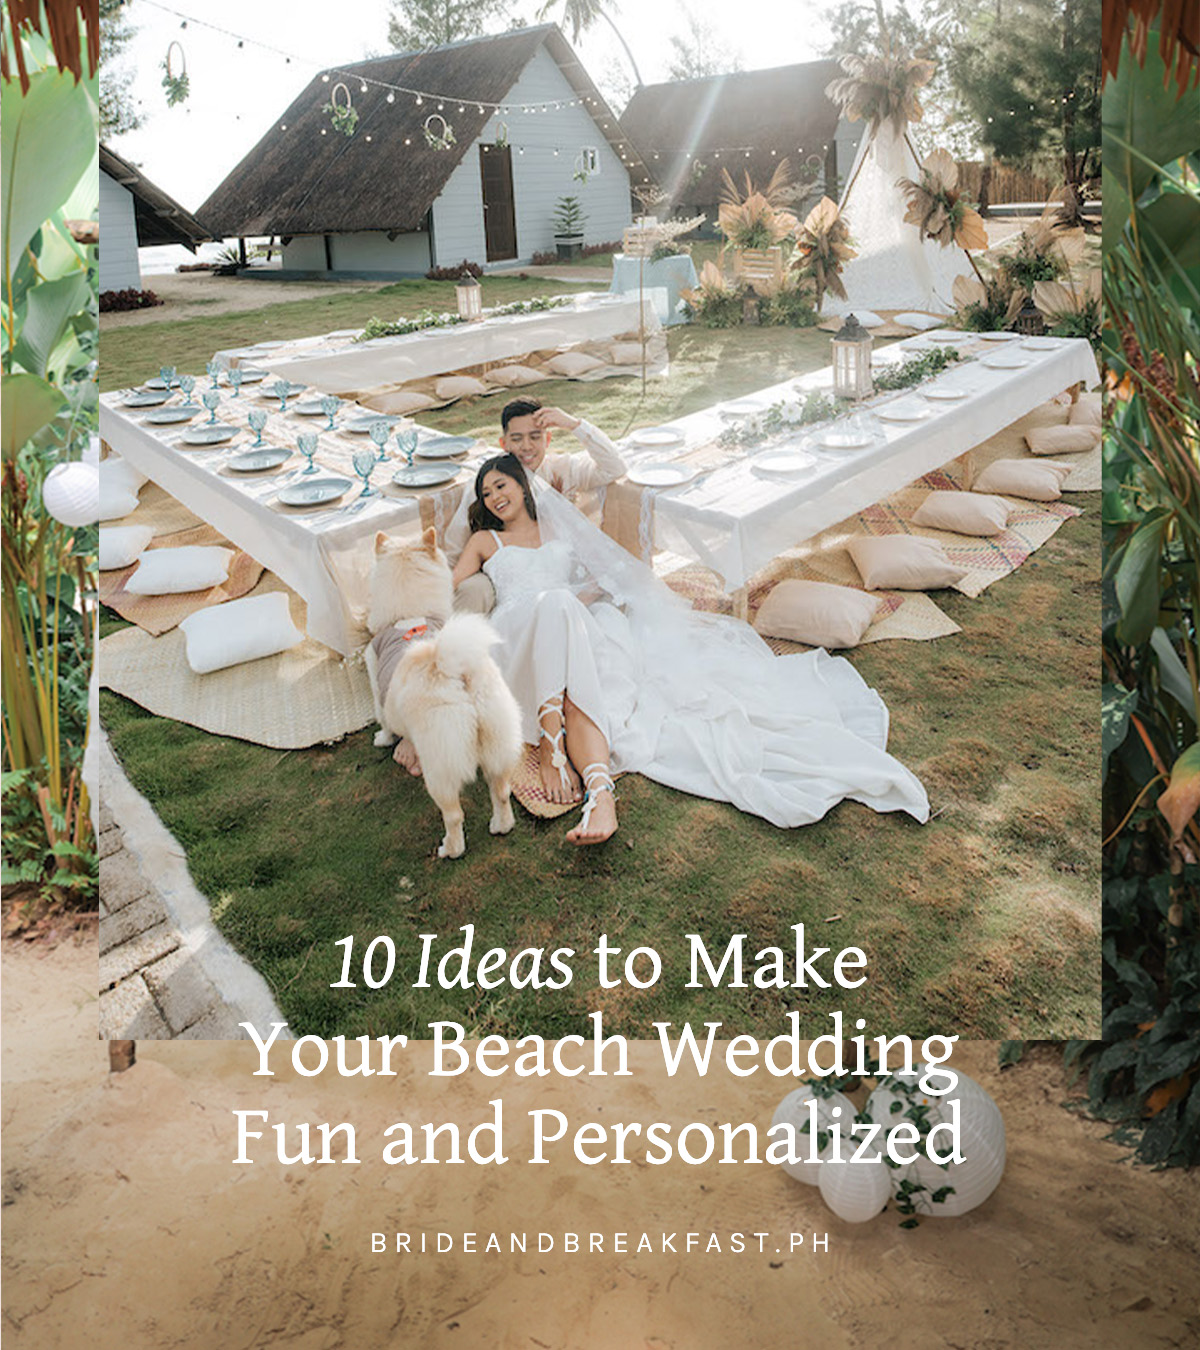 10 Ideas to Make Your Beach Wedding Fun and Personalized